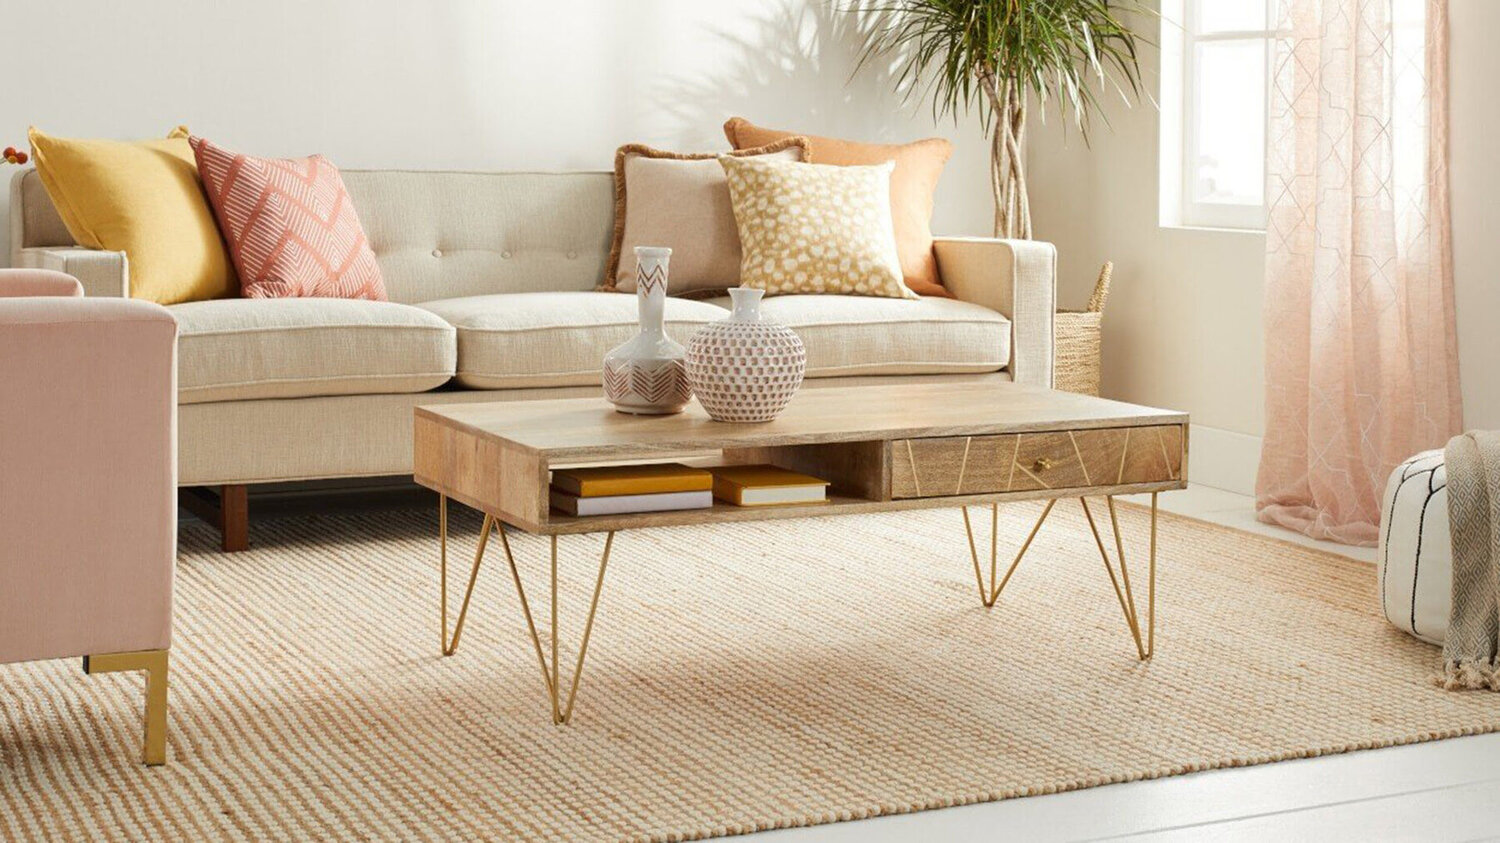 Should A Coffee Table Be Lower Than A Sofa?